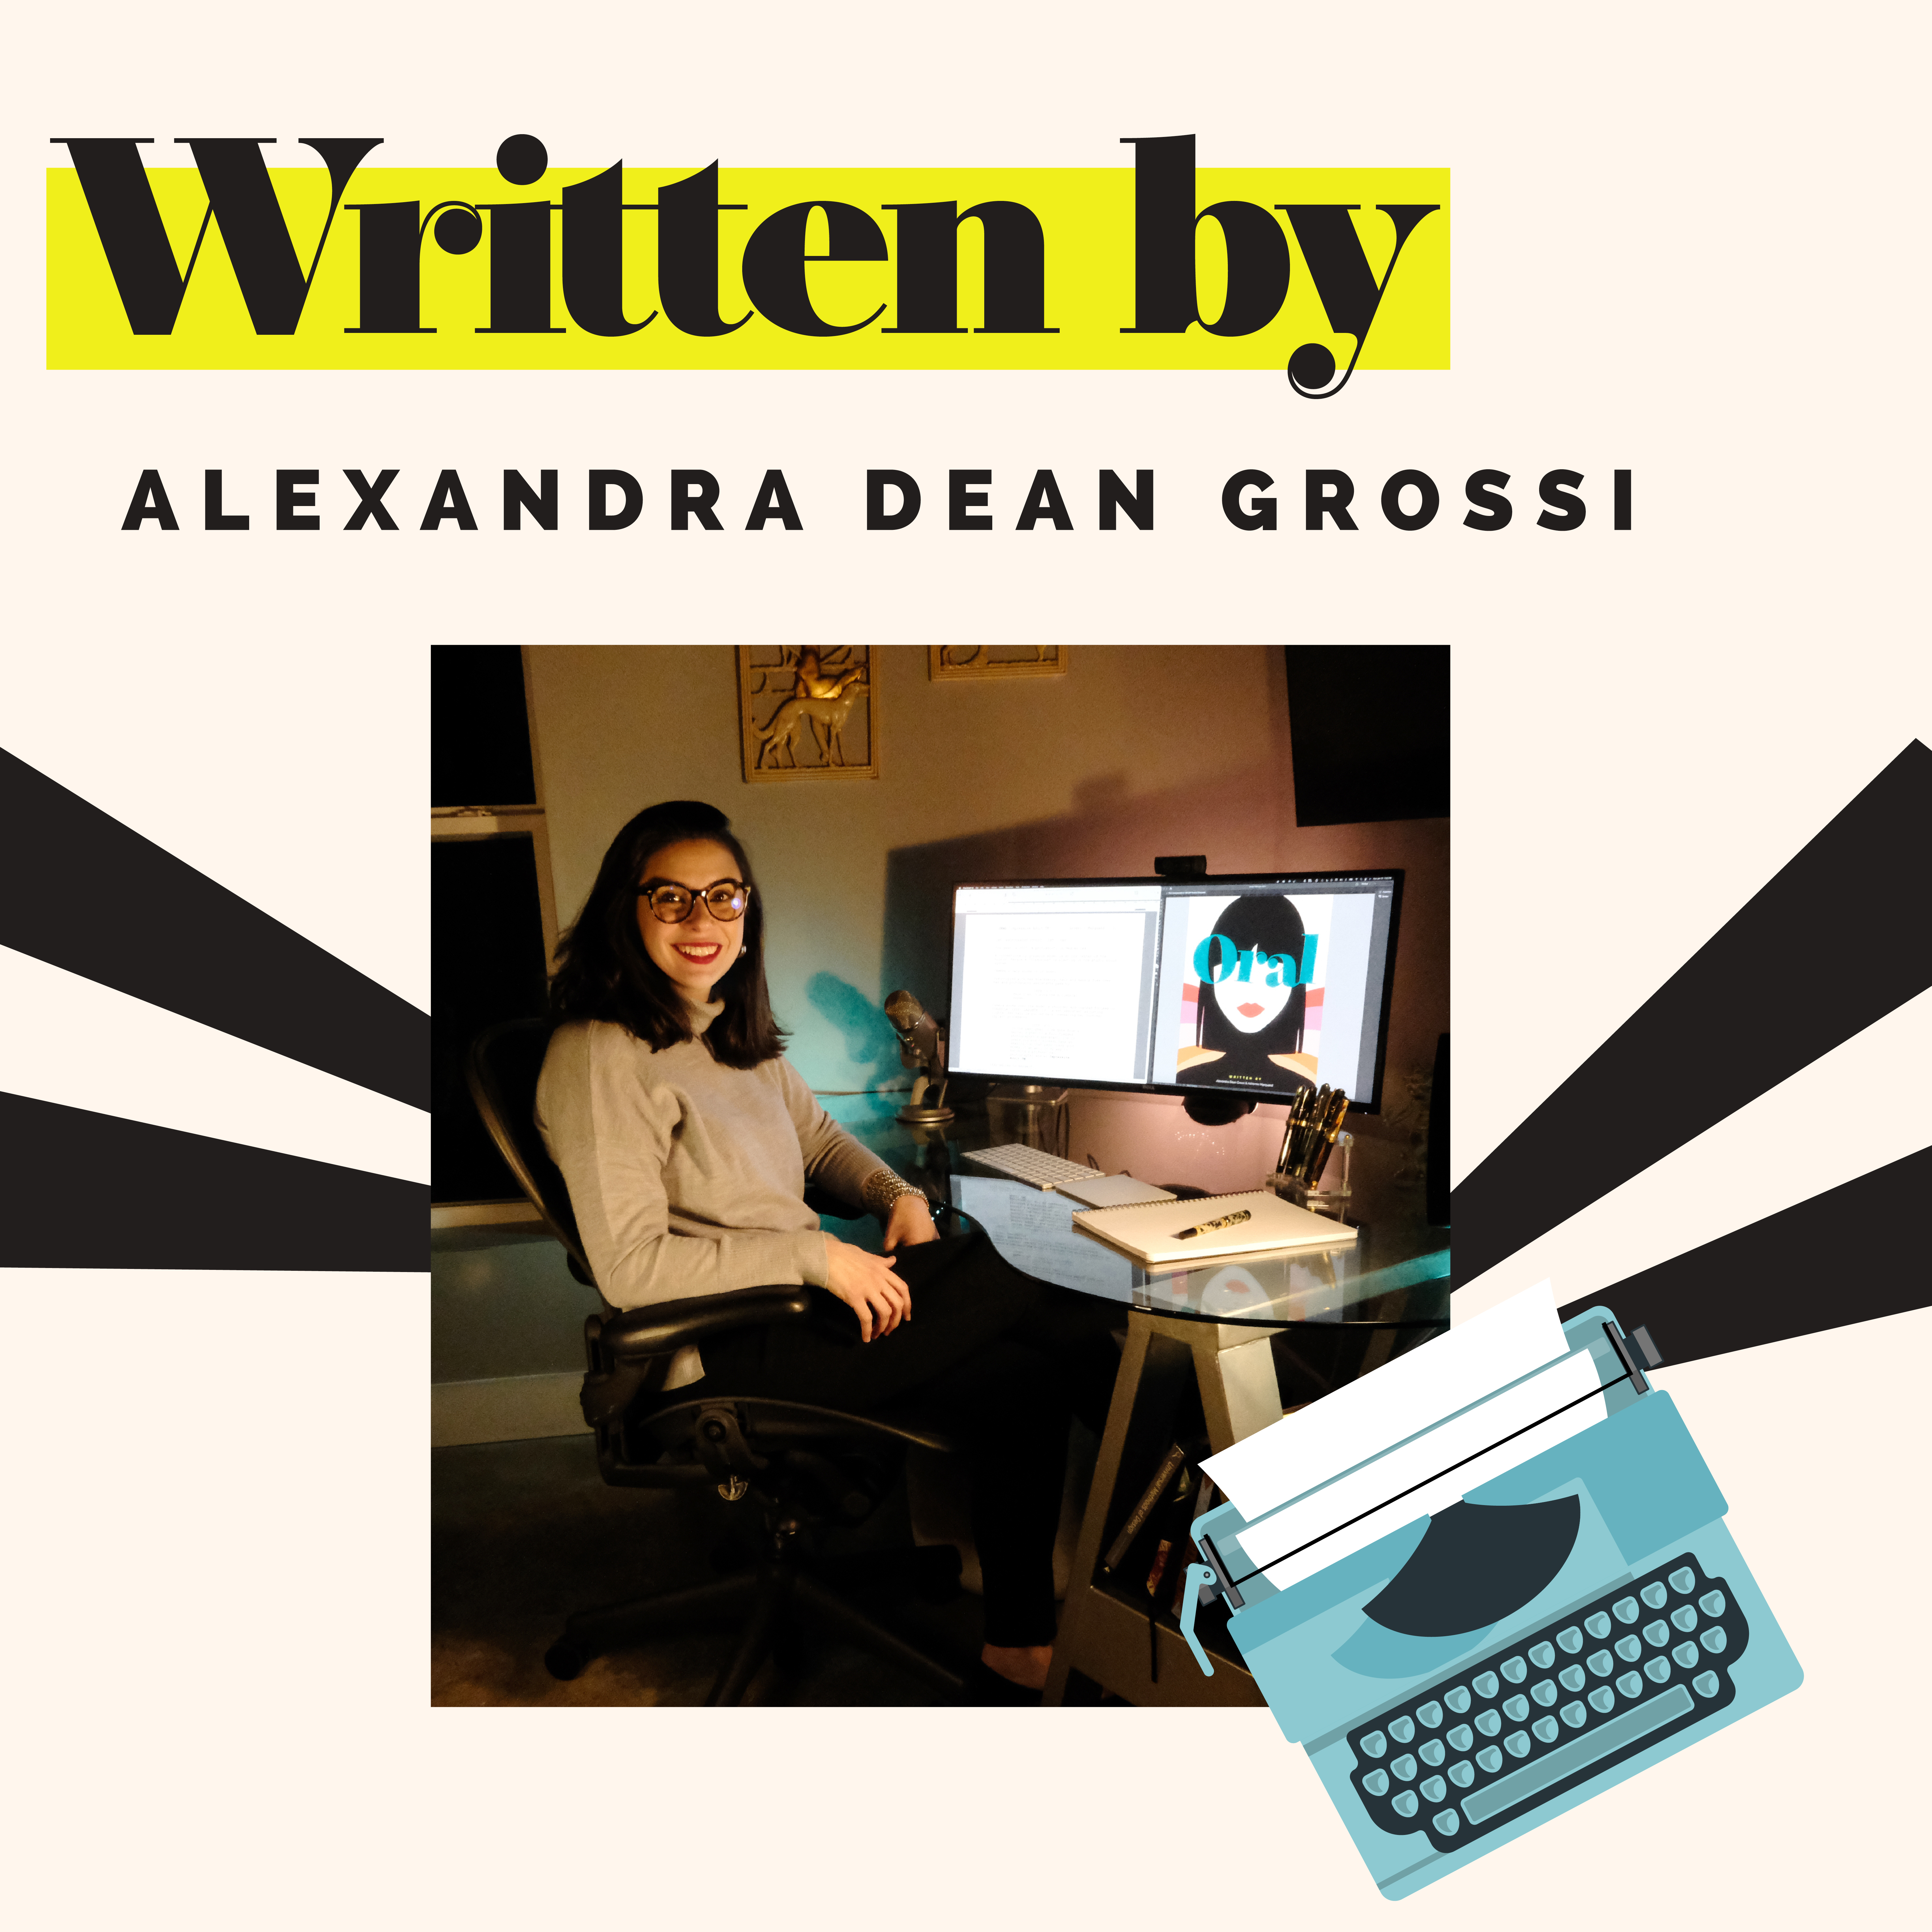 The headline reads “Written by Alexandra Dean Grossi.” In the center is a picture of a dark haired woman wearing glasses and seated at her computer. Stylized graphics around the images include black and white stripes and a teal typewriter.